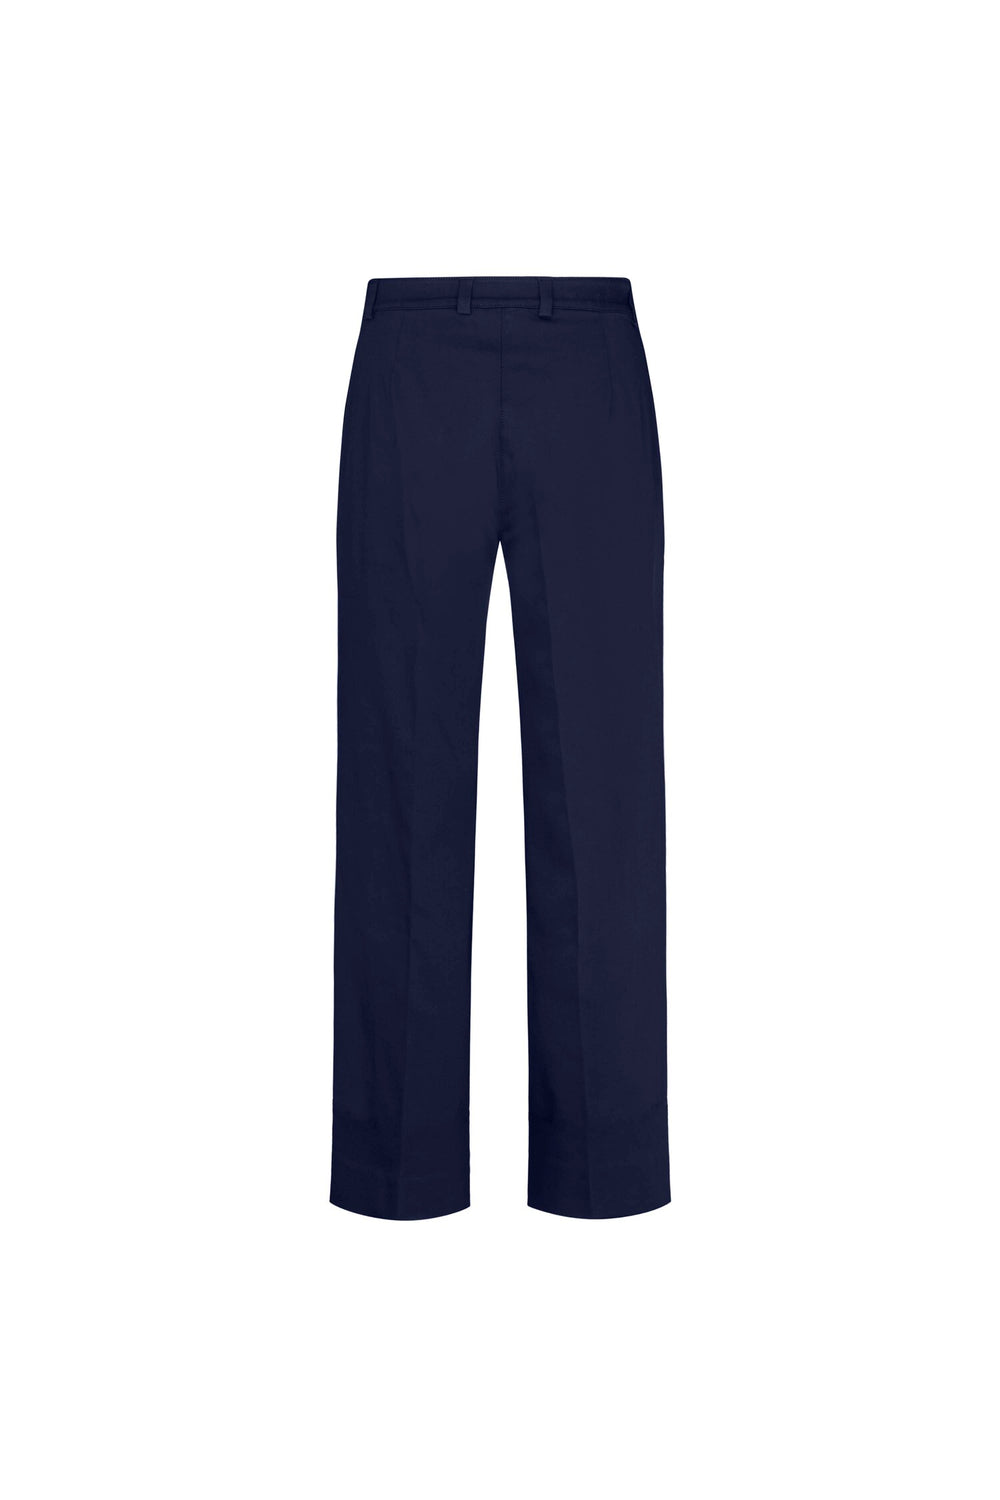 LAURIE Phoebe Loose ML Trousers LOOSE 49105 Navy